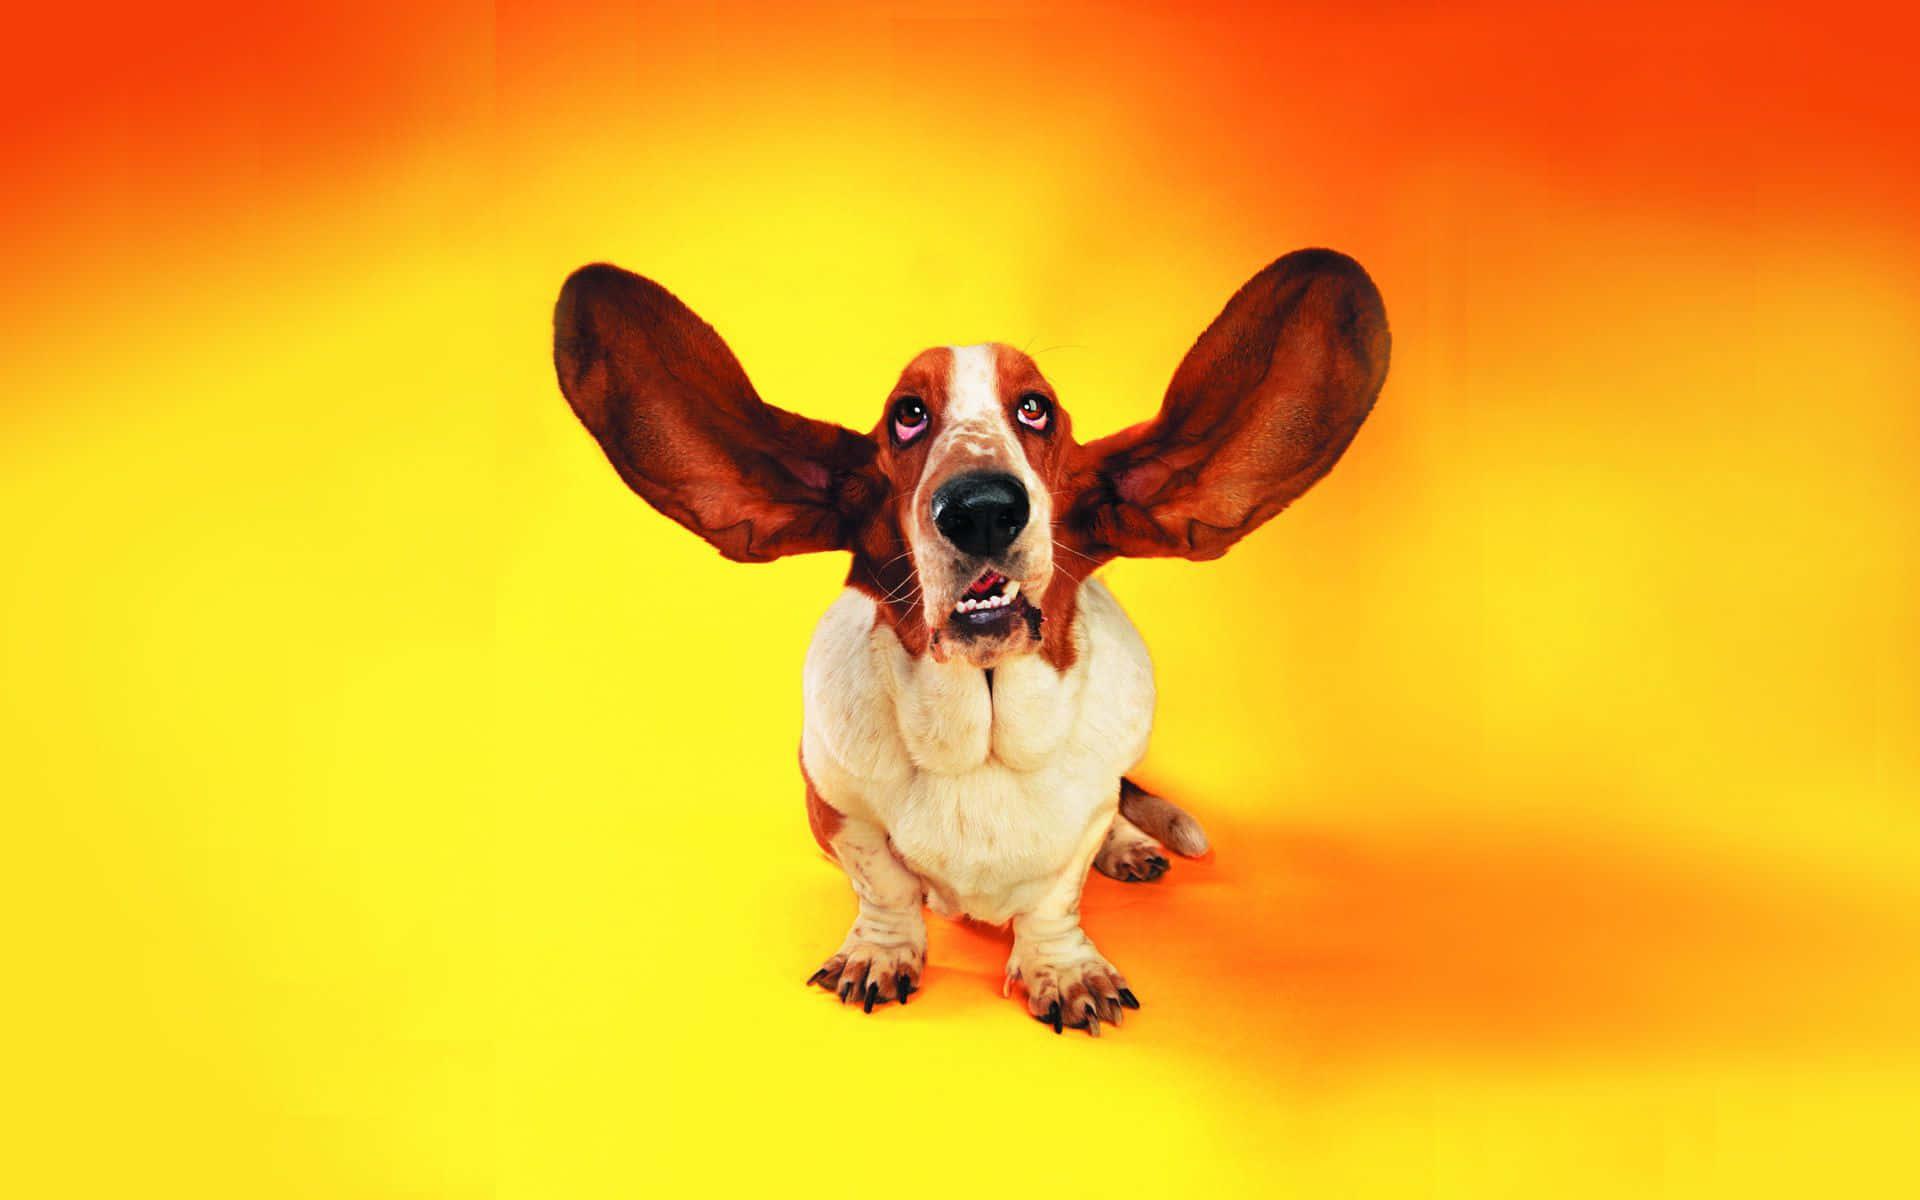 A Dog With Ears Up On A Yellow Background